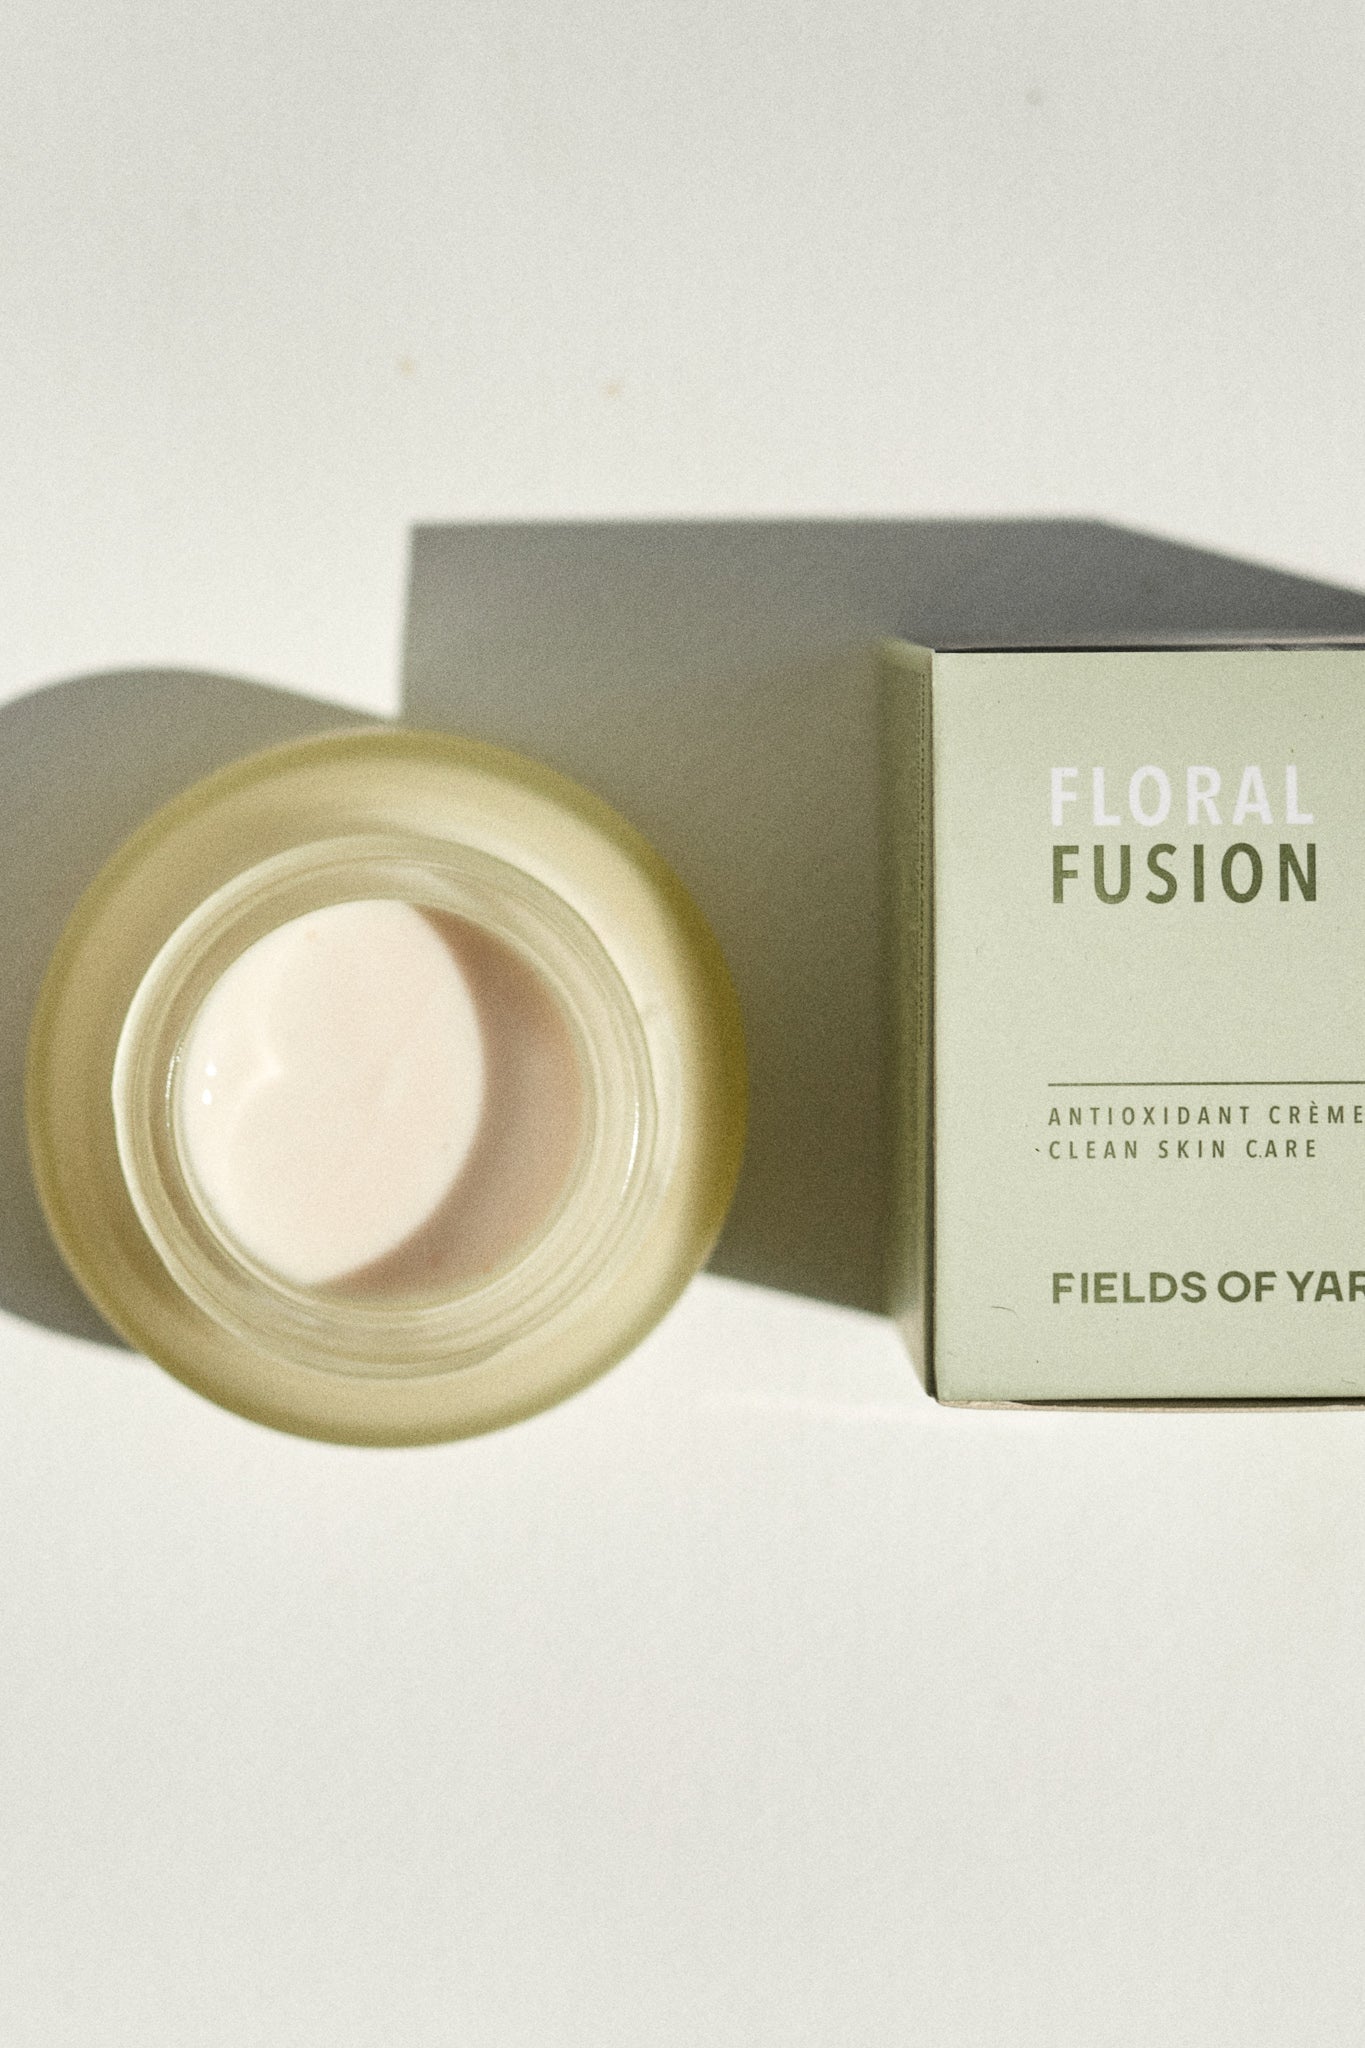 aerial view of the Floral Fusion Antioxidant Cream by Fields of Yarrow jar and packaging